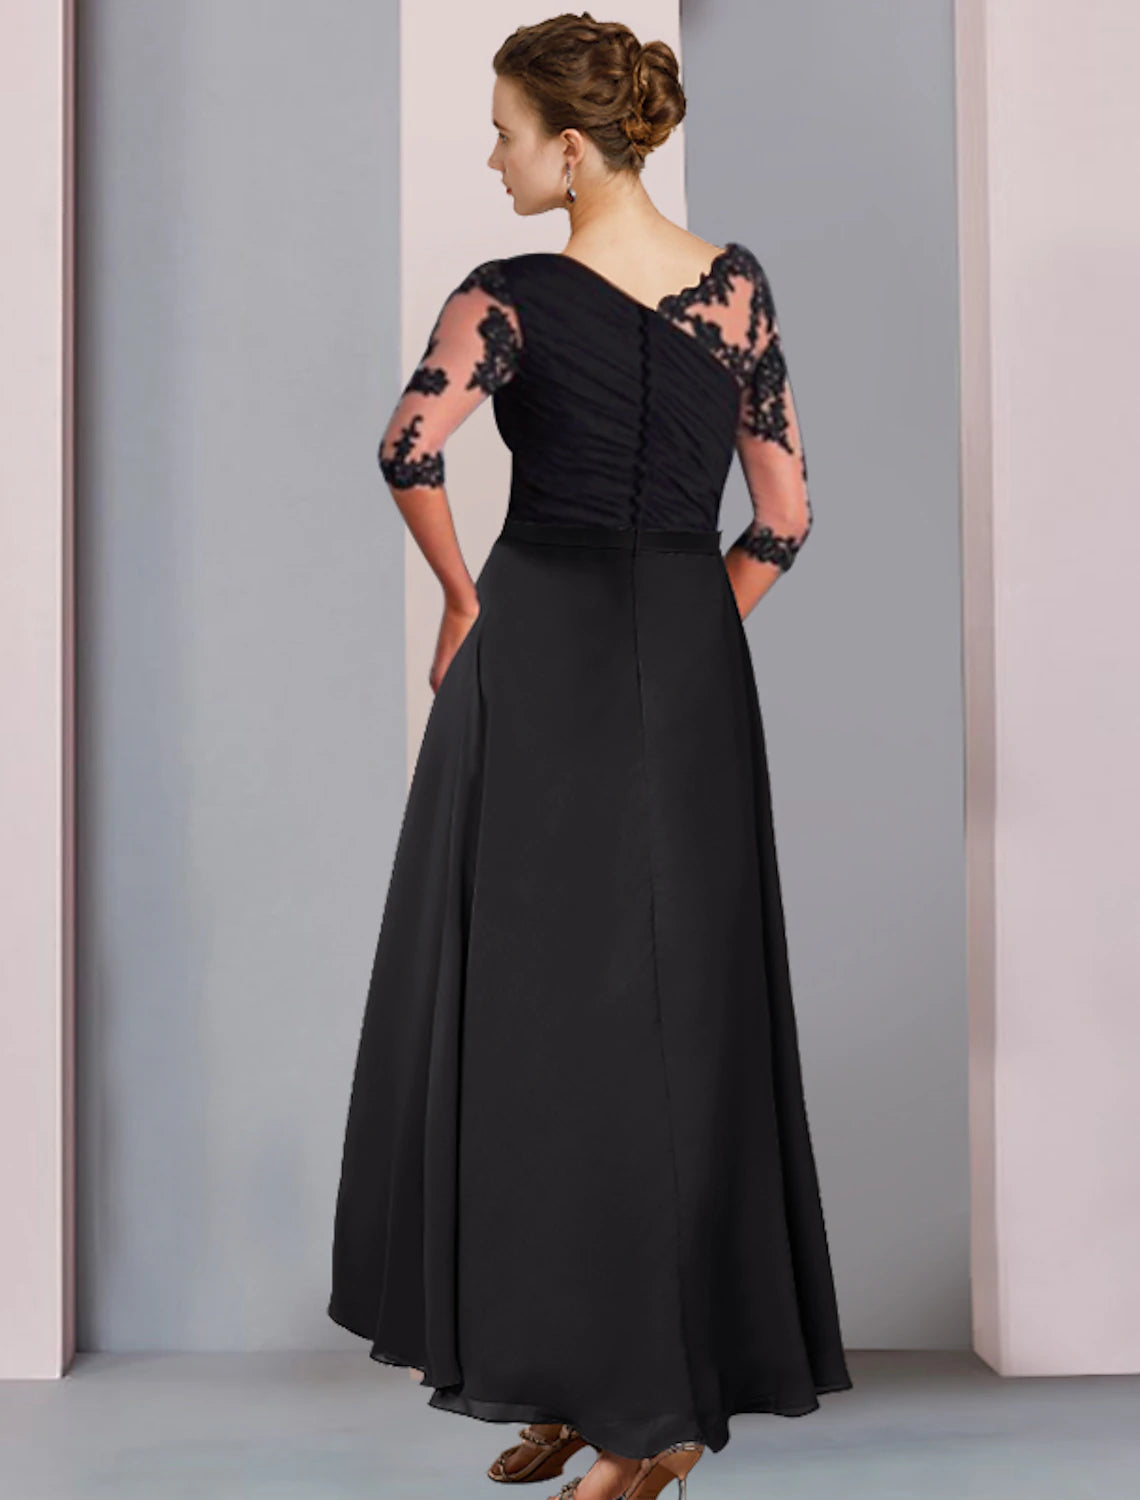 A-Line Mother of the Bride Dress Wedding Guest Elegant High Low Scoop Neck Asymmetrical Tea Length Chiffon Lace Half Sleeve with Appliques Side-Draped